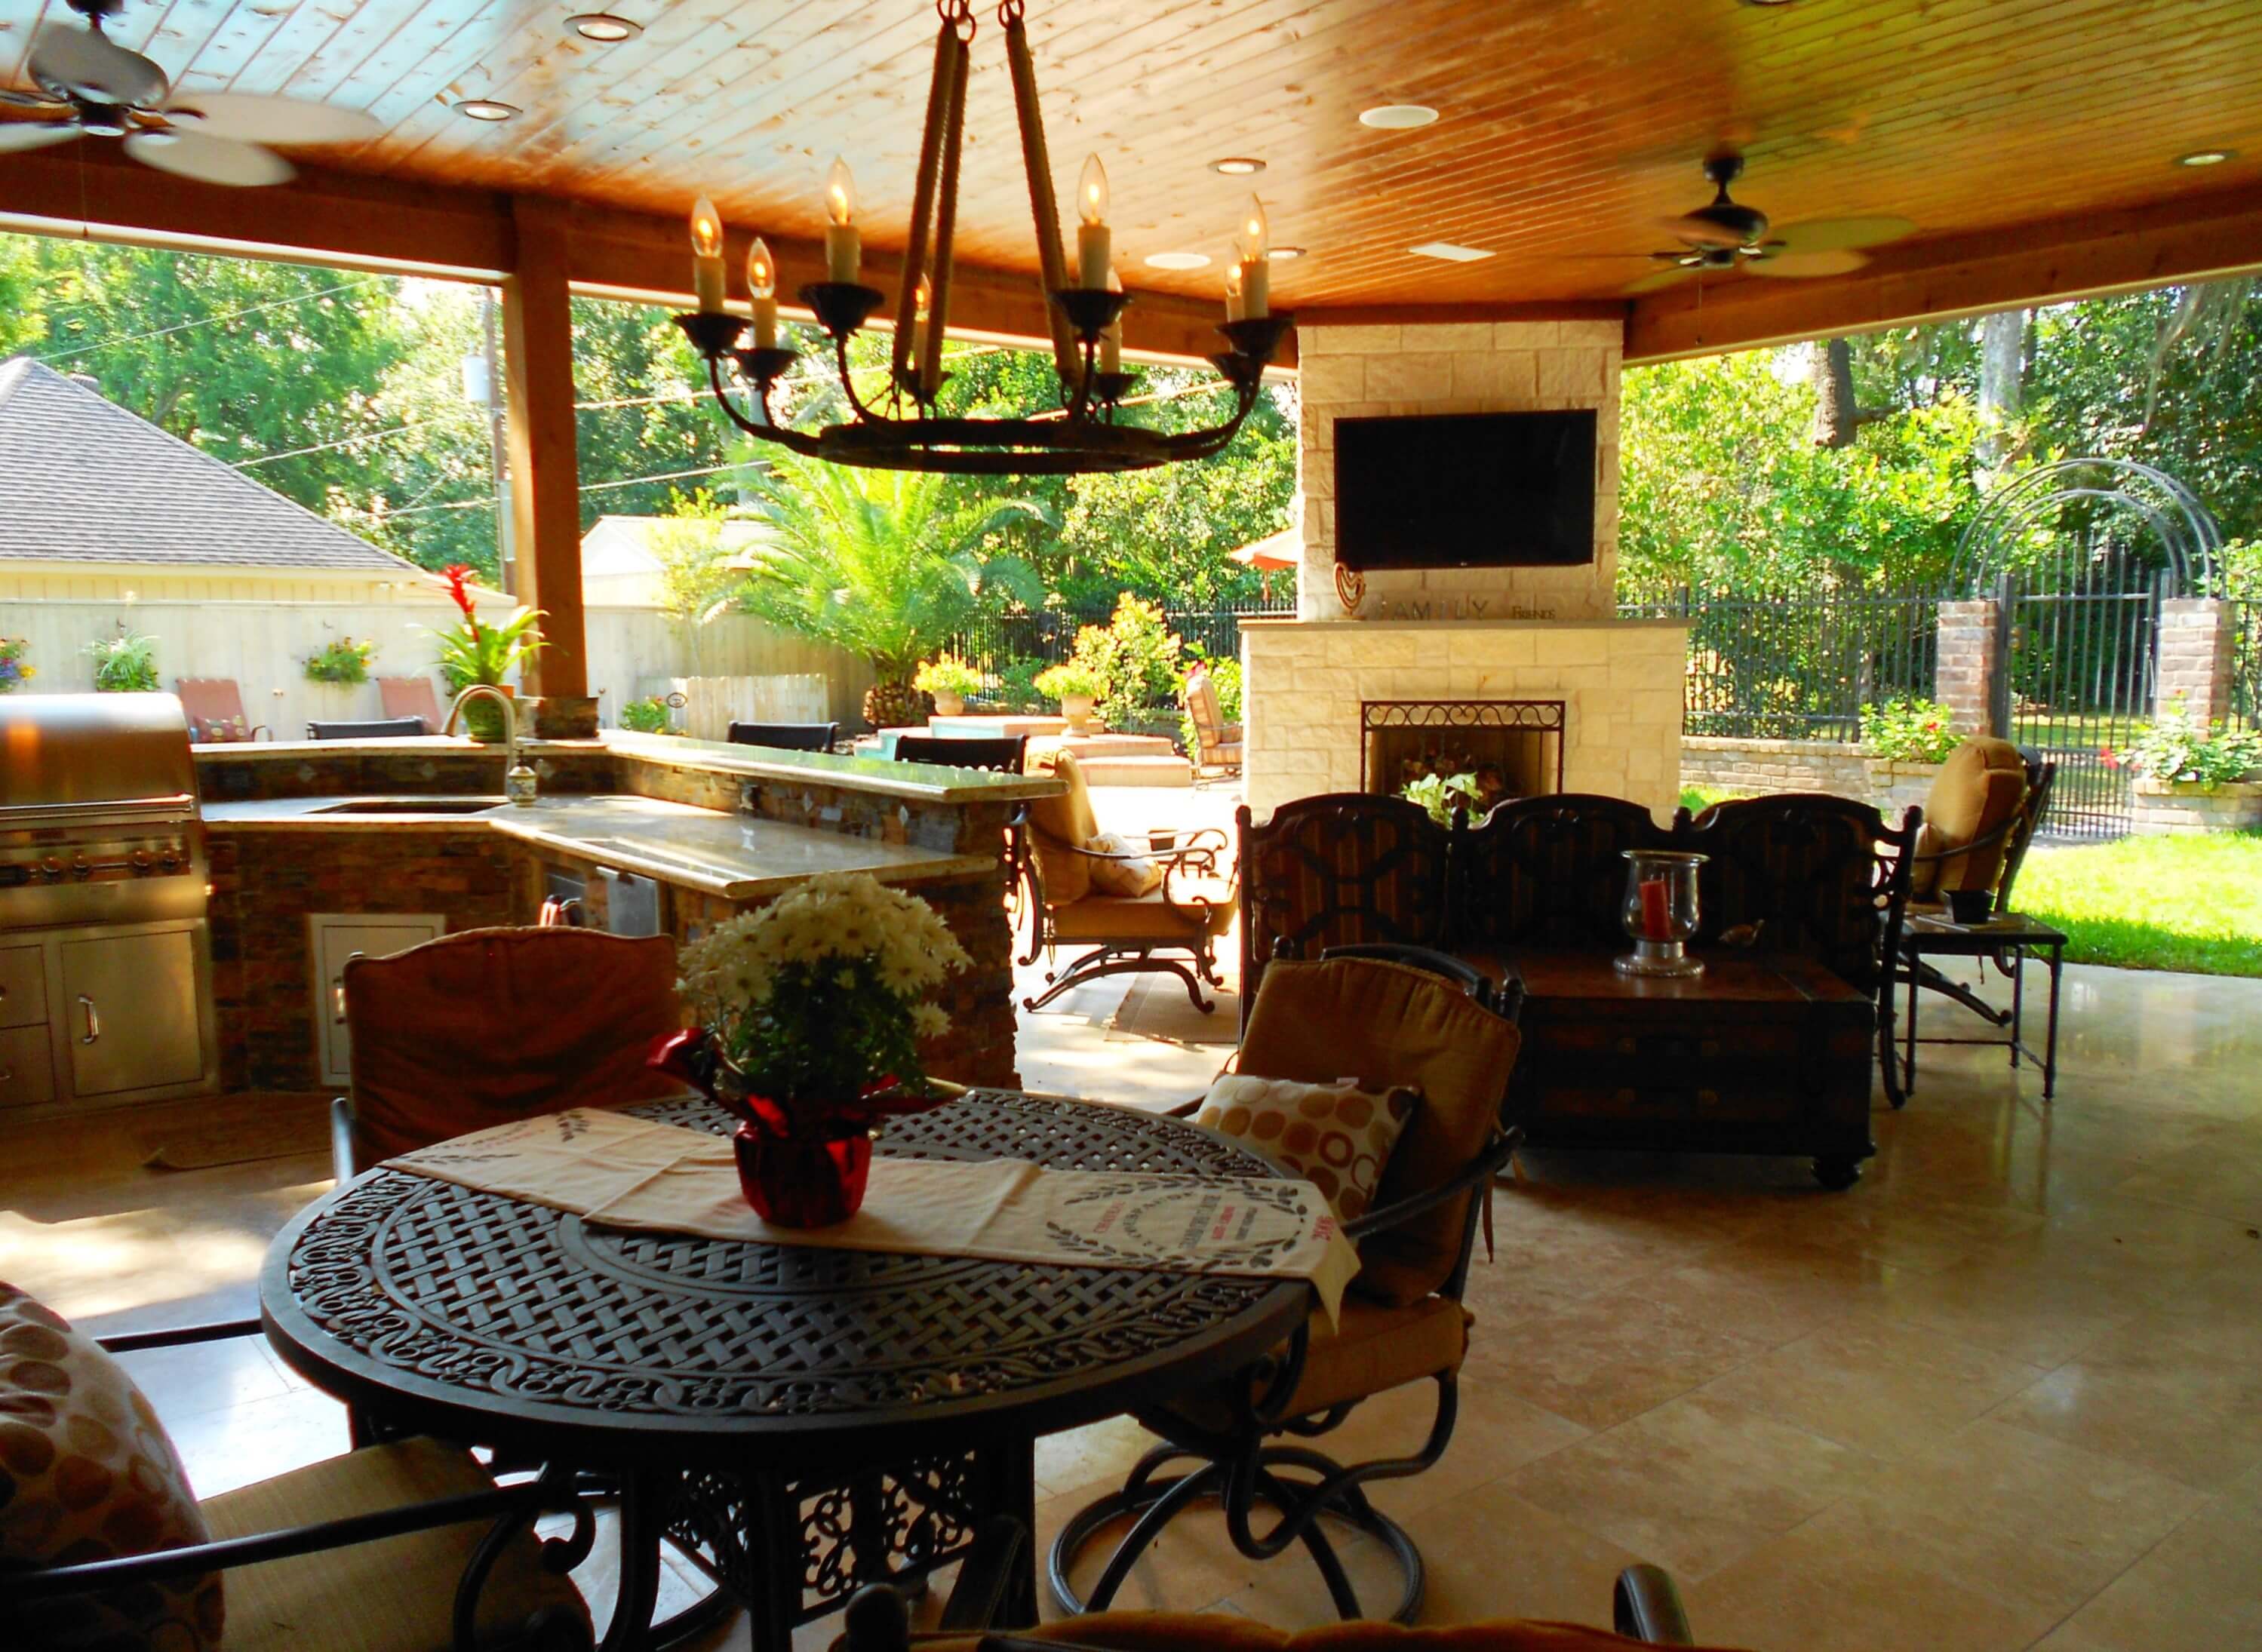 Texas Custom Patios, How Much Does It Cost To Build A Covered Patio With Fireplace